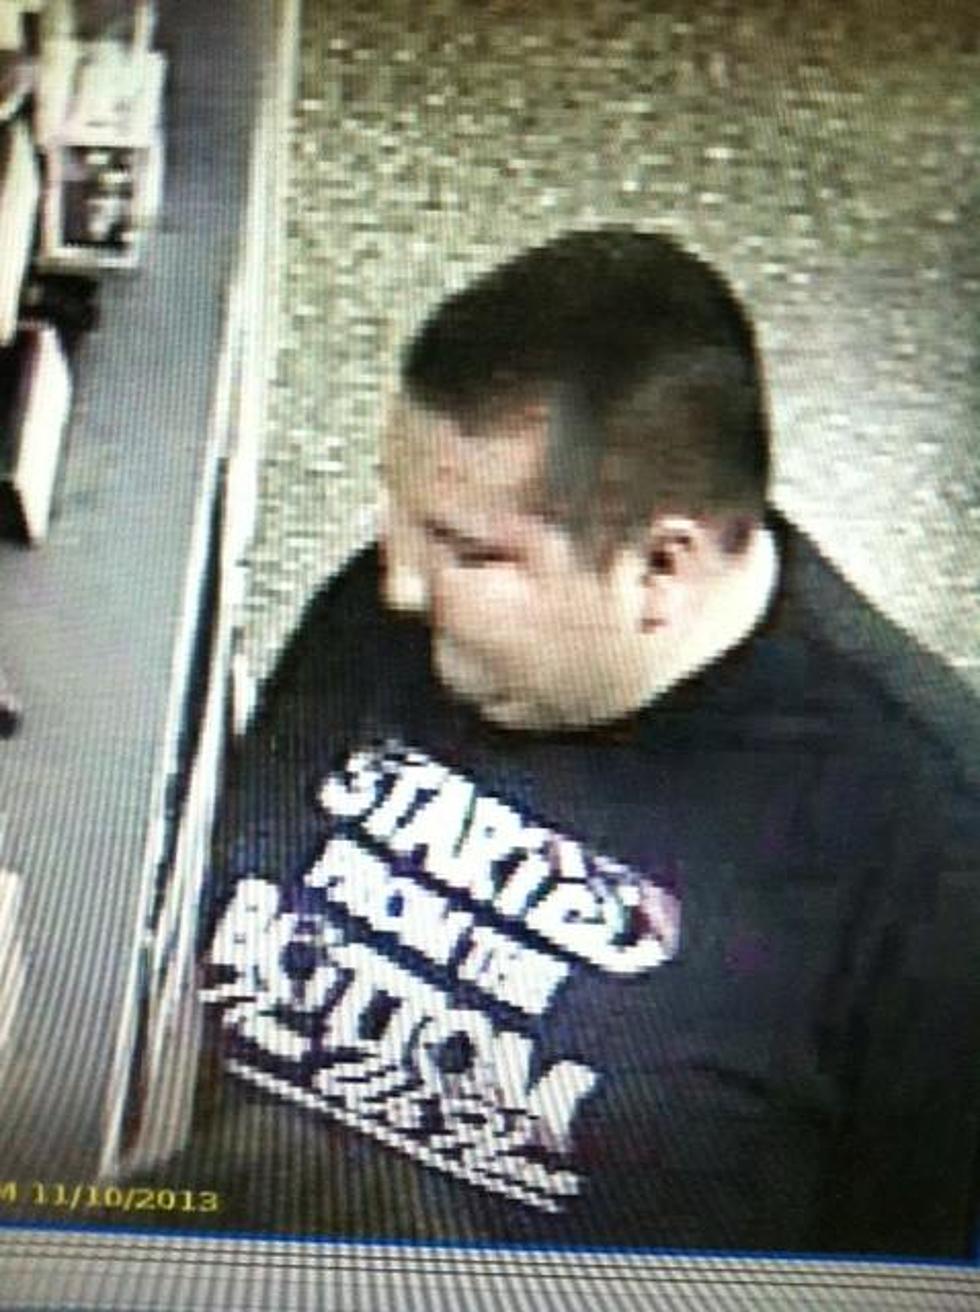 Ocean County Charity Donation Jar Thief ID’d by Police